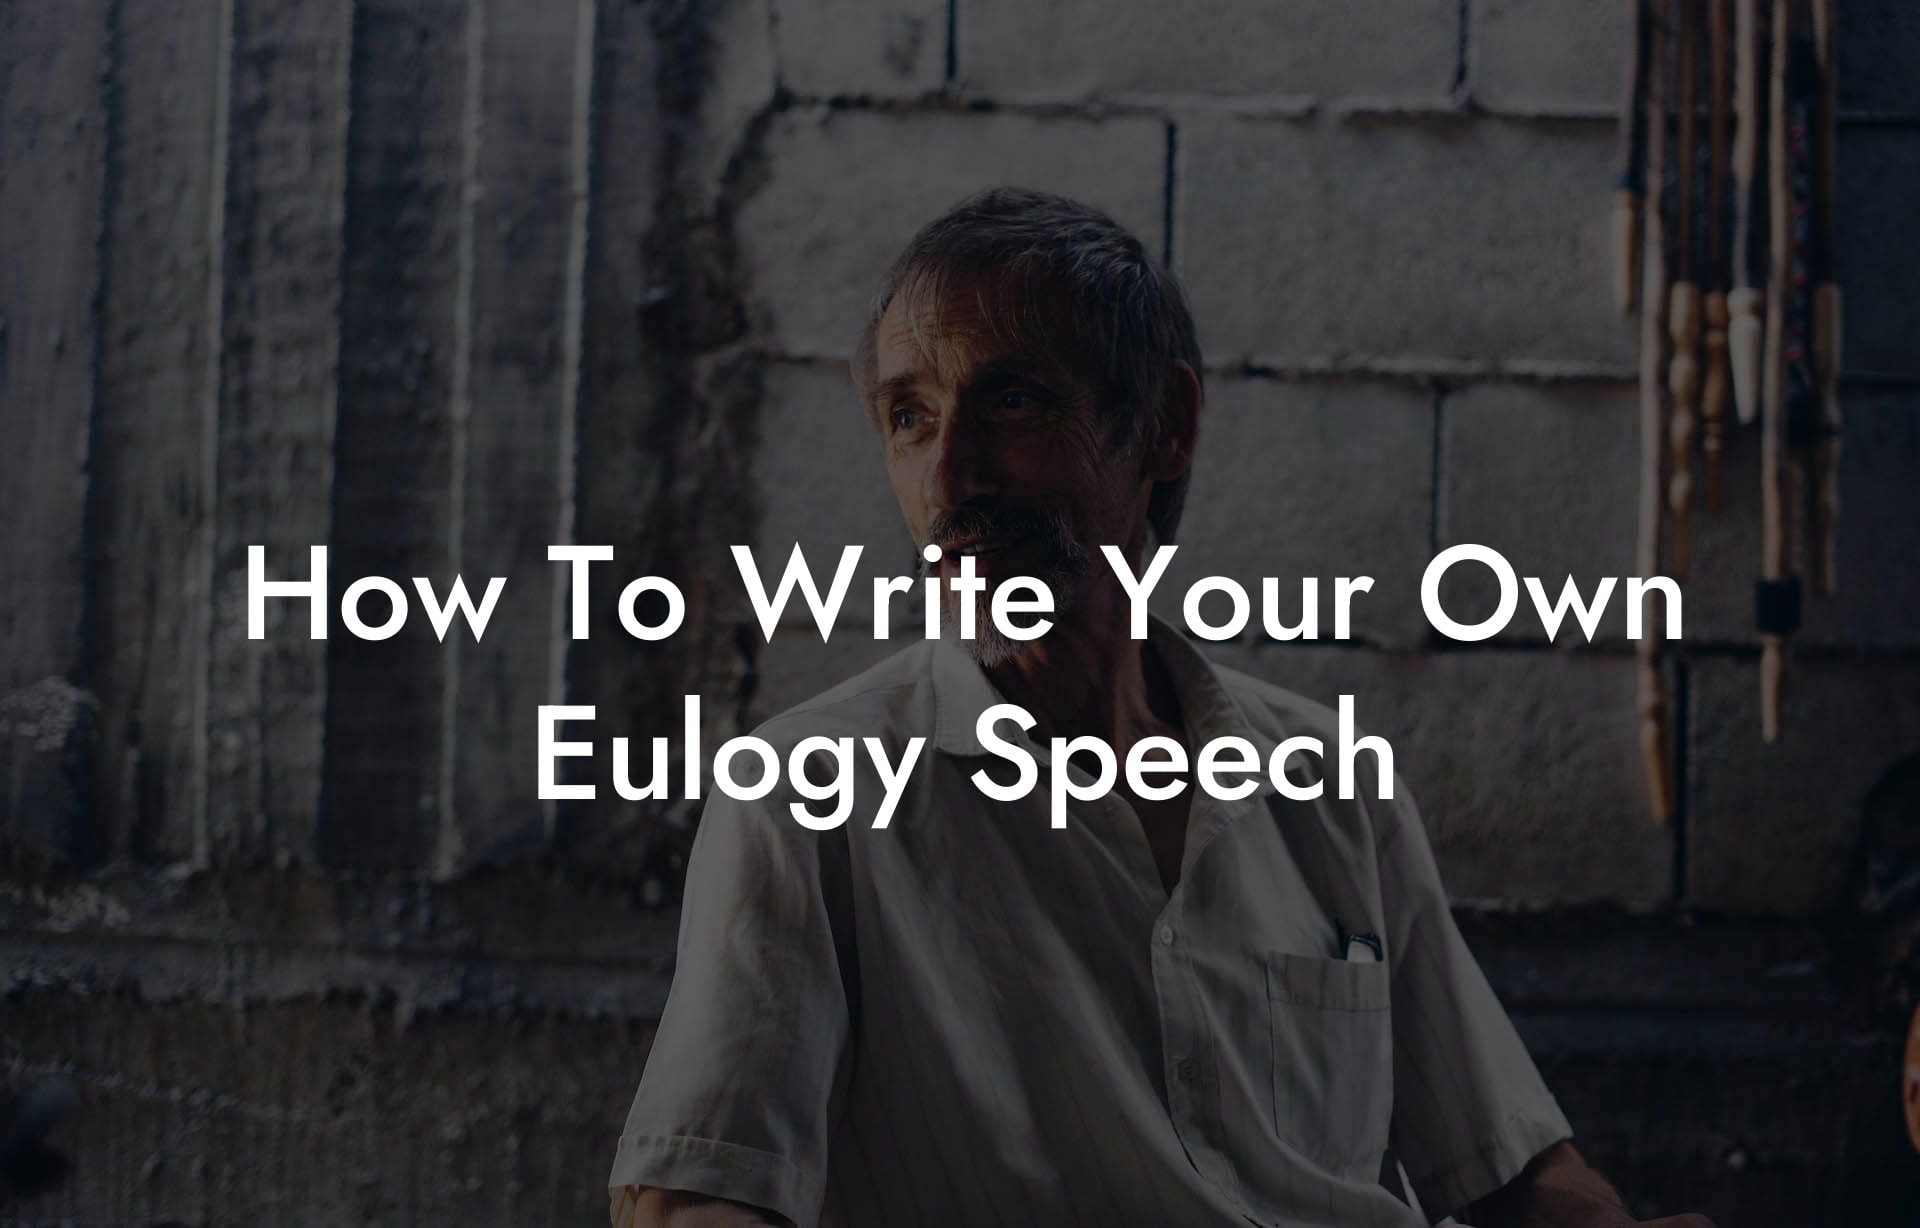 How To Write Your Own Eulogy Speech